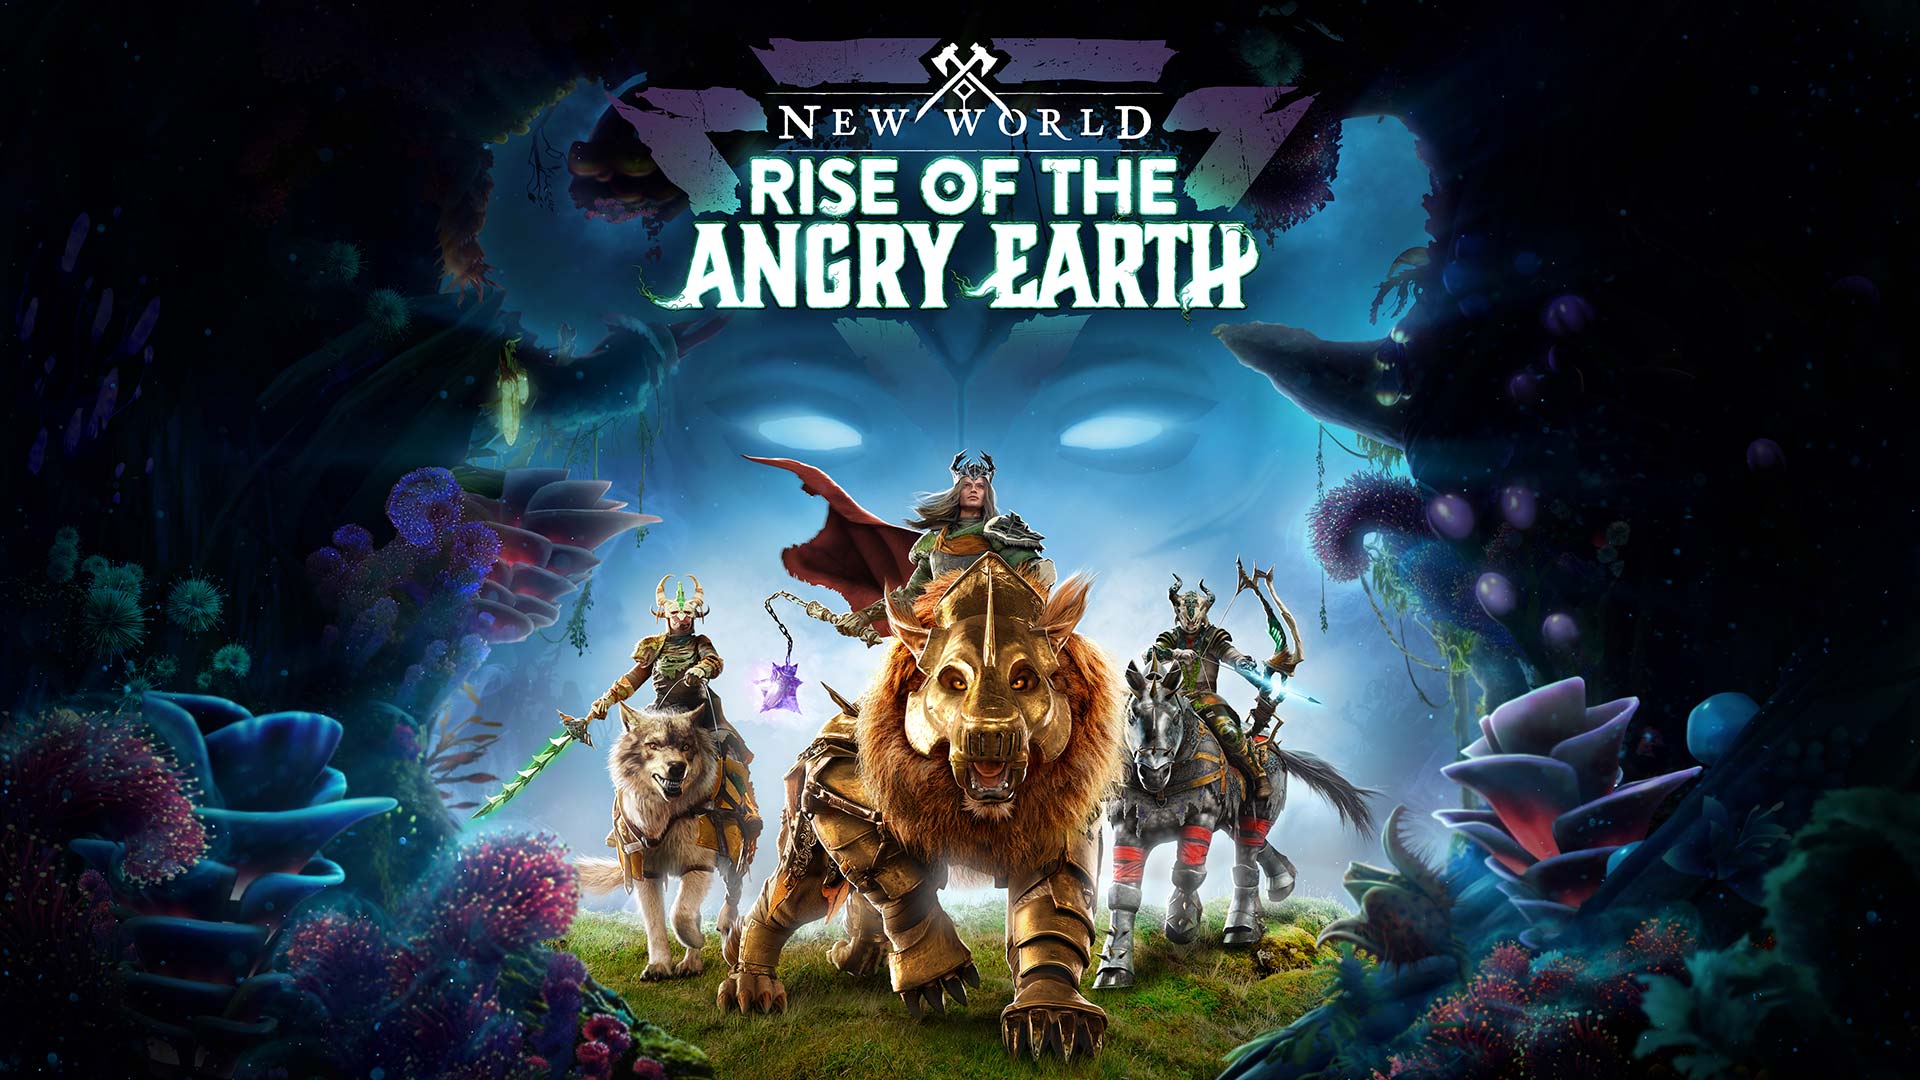 New World system requirements